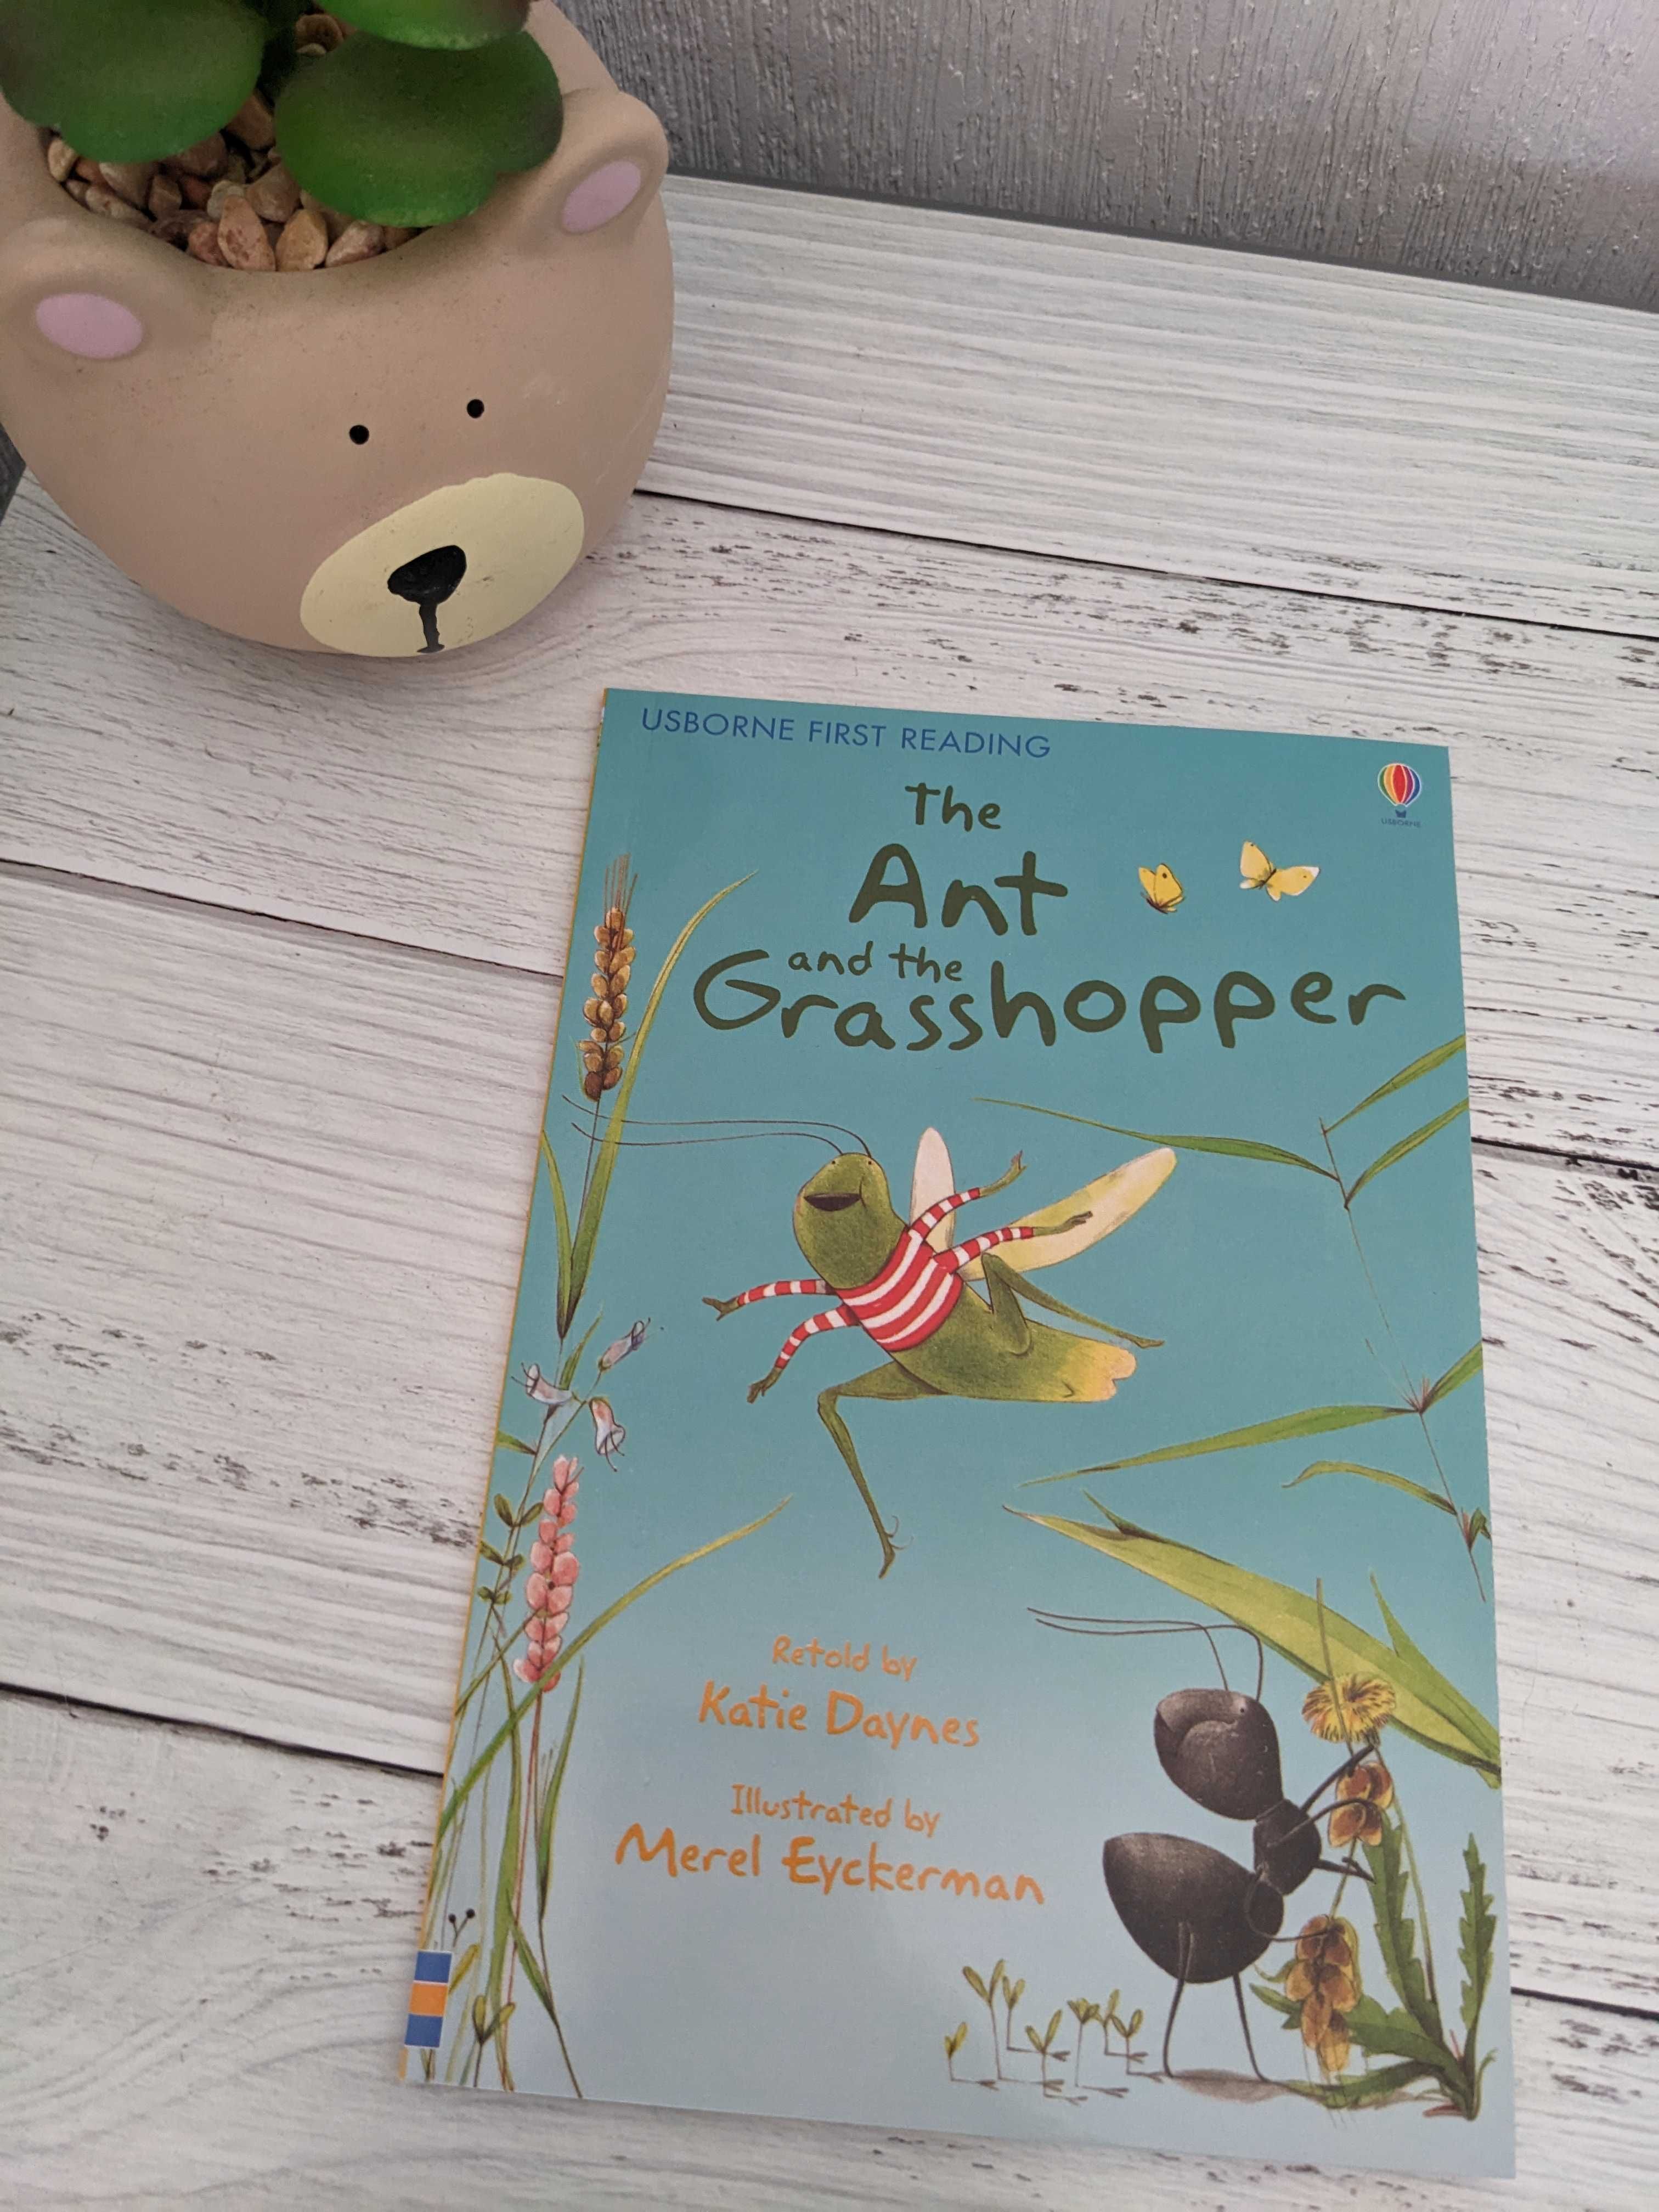 Usborne First Reading The ant and the grasshopper